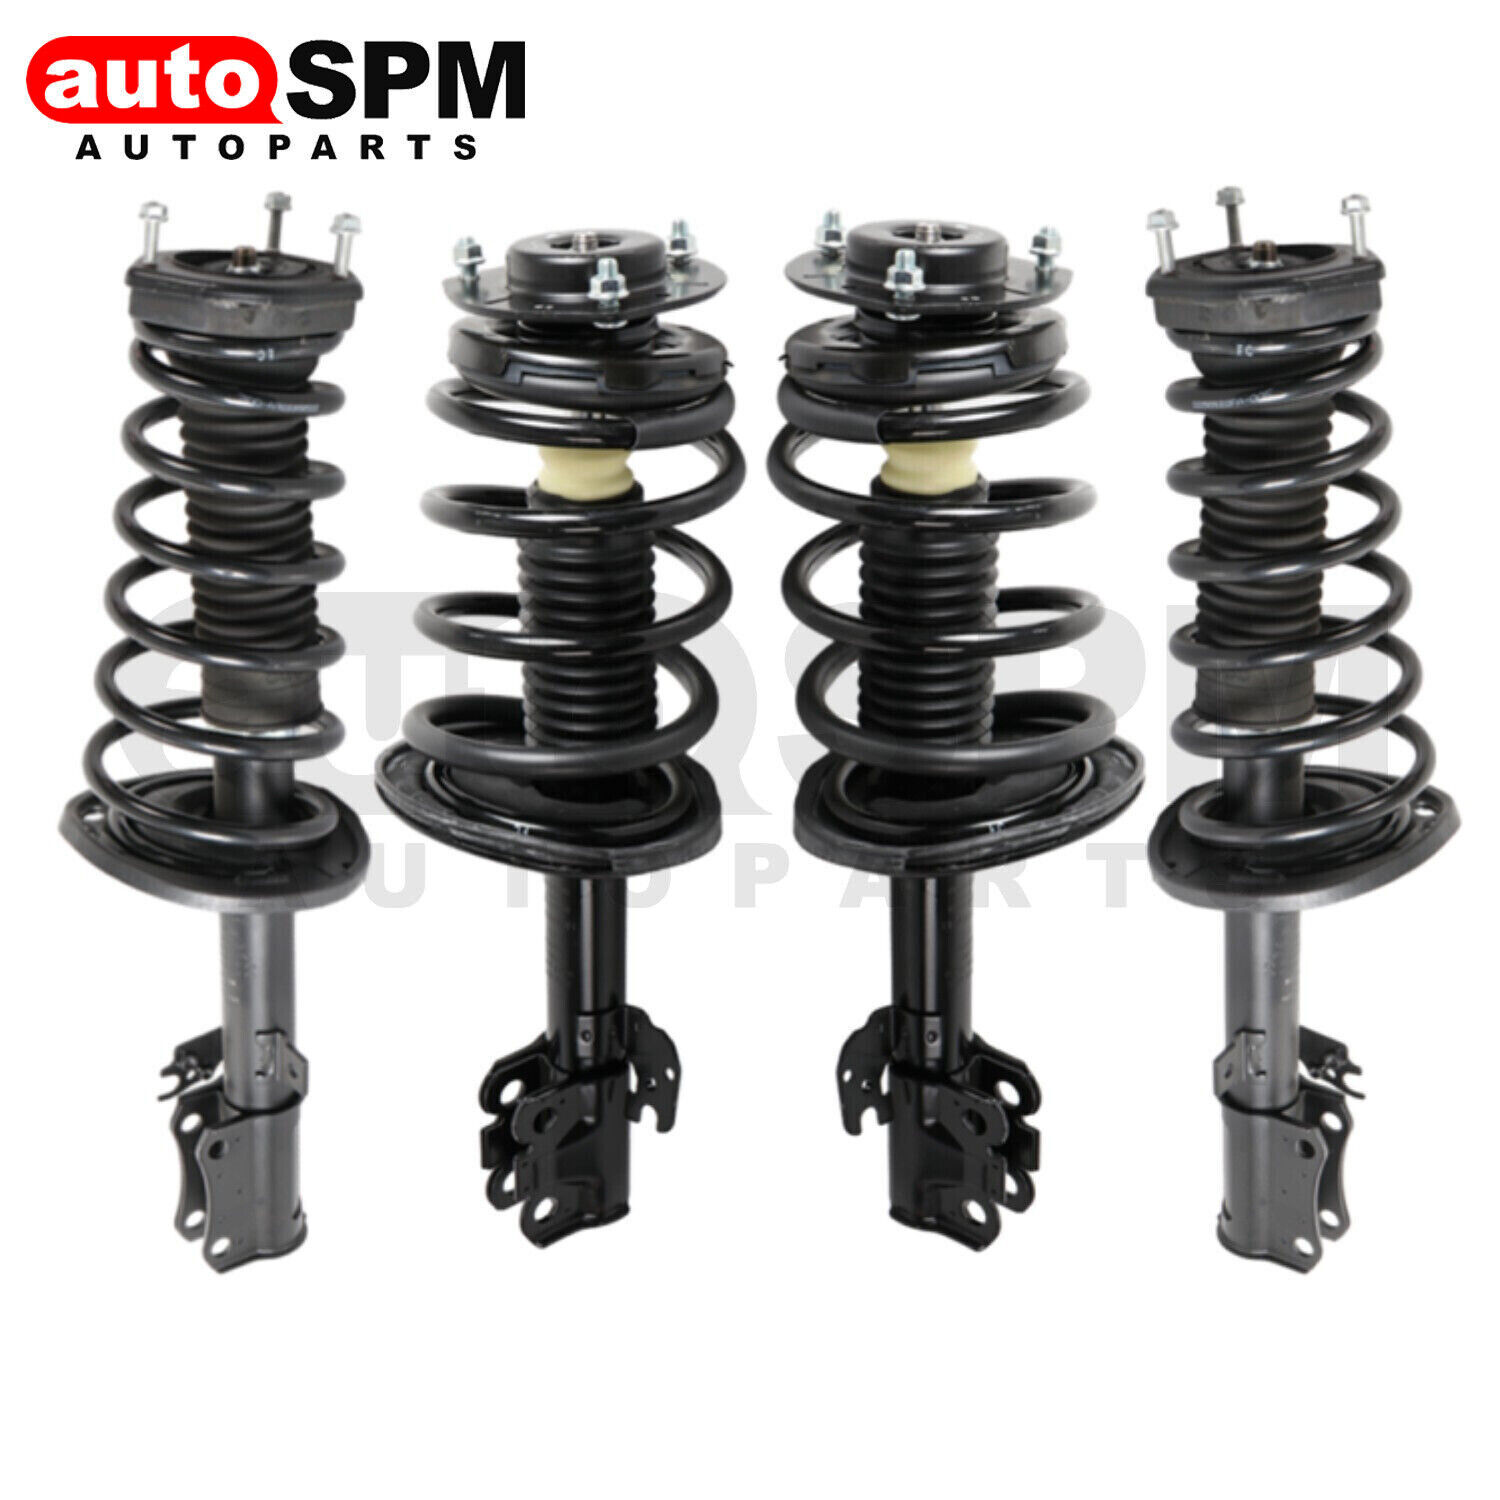 Front Rear Set 4 Complete Struts Shocks Assembly For 2007-2010 2011 Toyota Camry